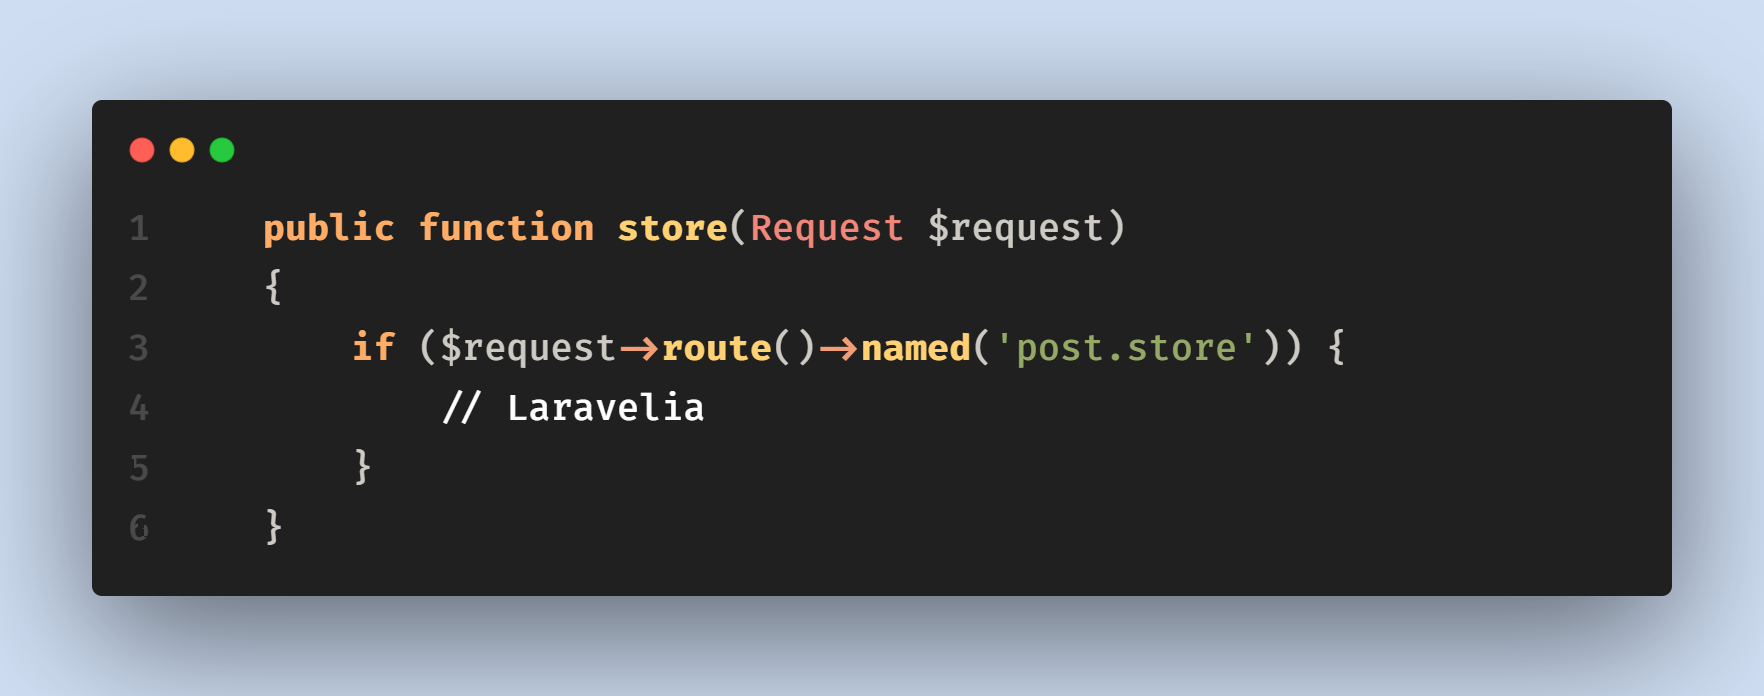 laravel-check-requested-route-name